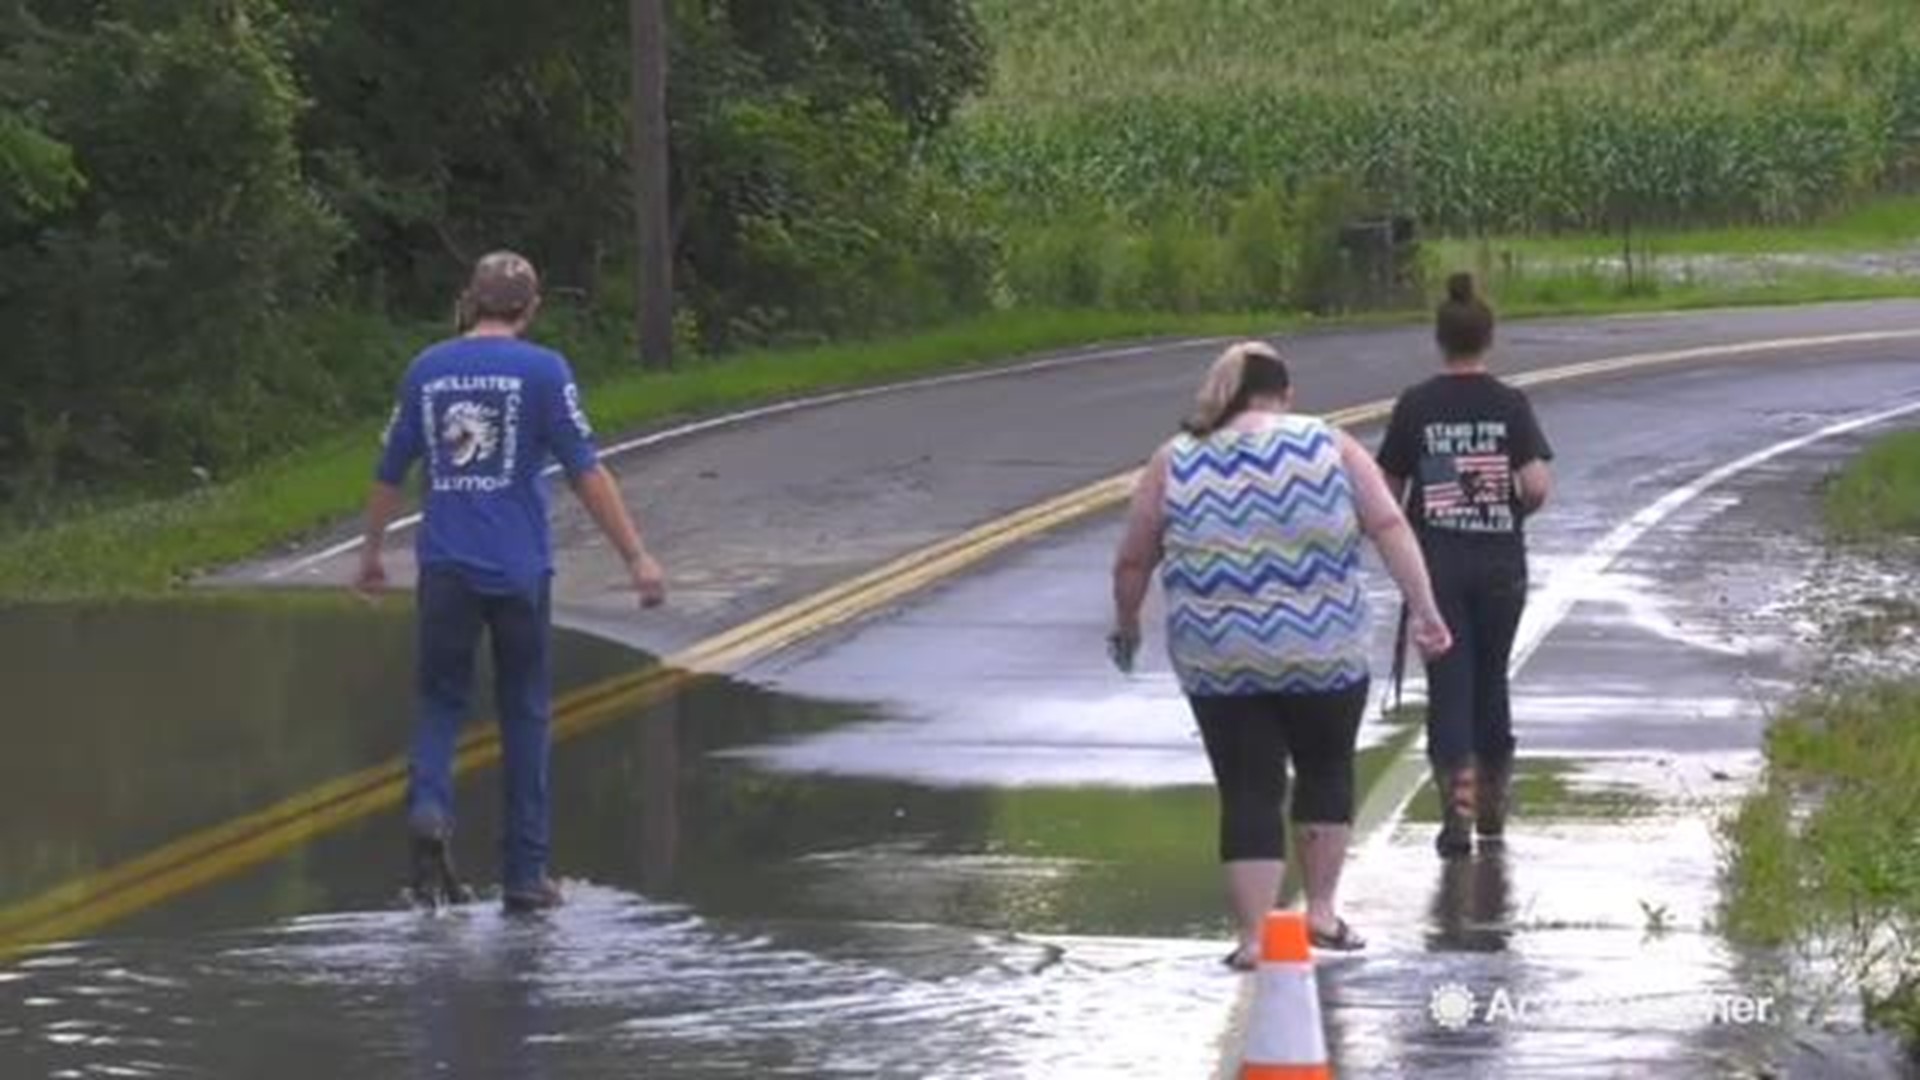  Over a dozen counties in upstate New York are under a state of emergency due to severe flash floods. Many roads have been blocked off due to flooding around Elmira, New York, and emergency workers warn residents use extreme caution if you must go out. 